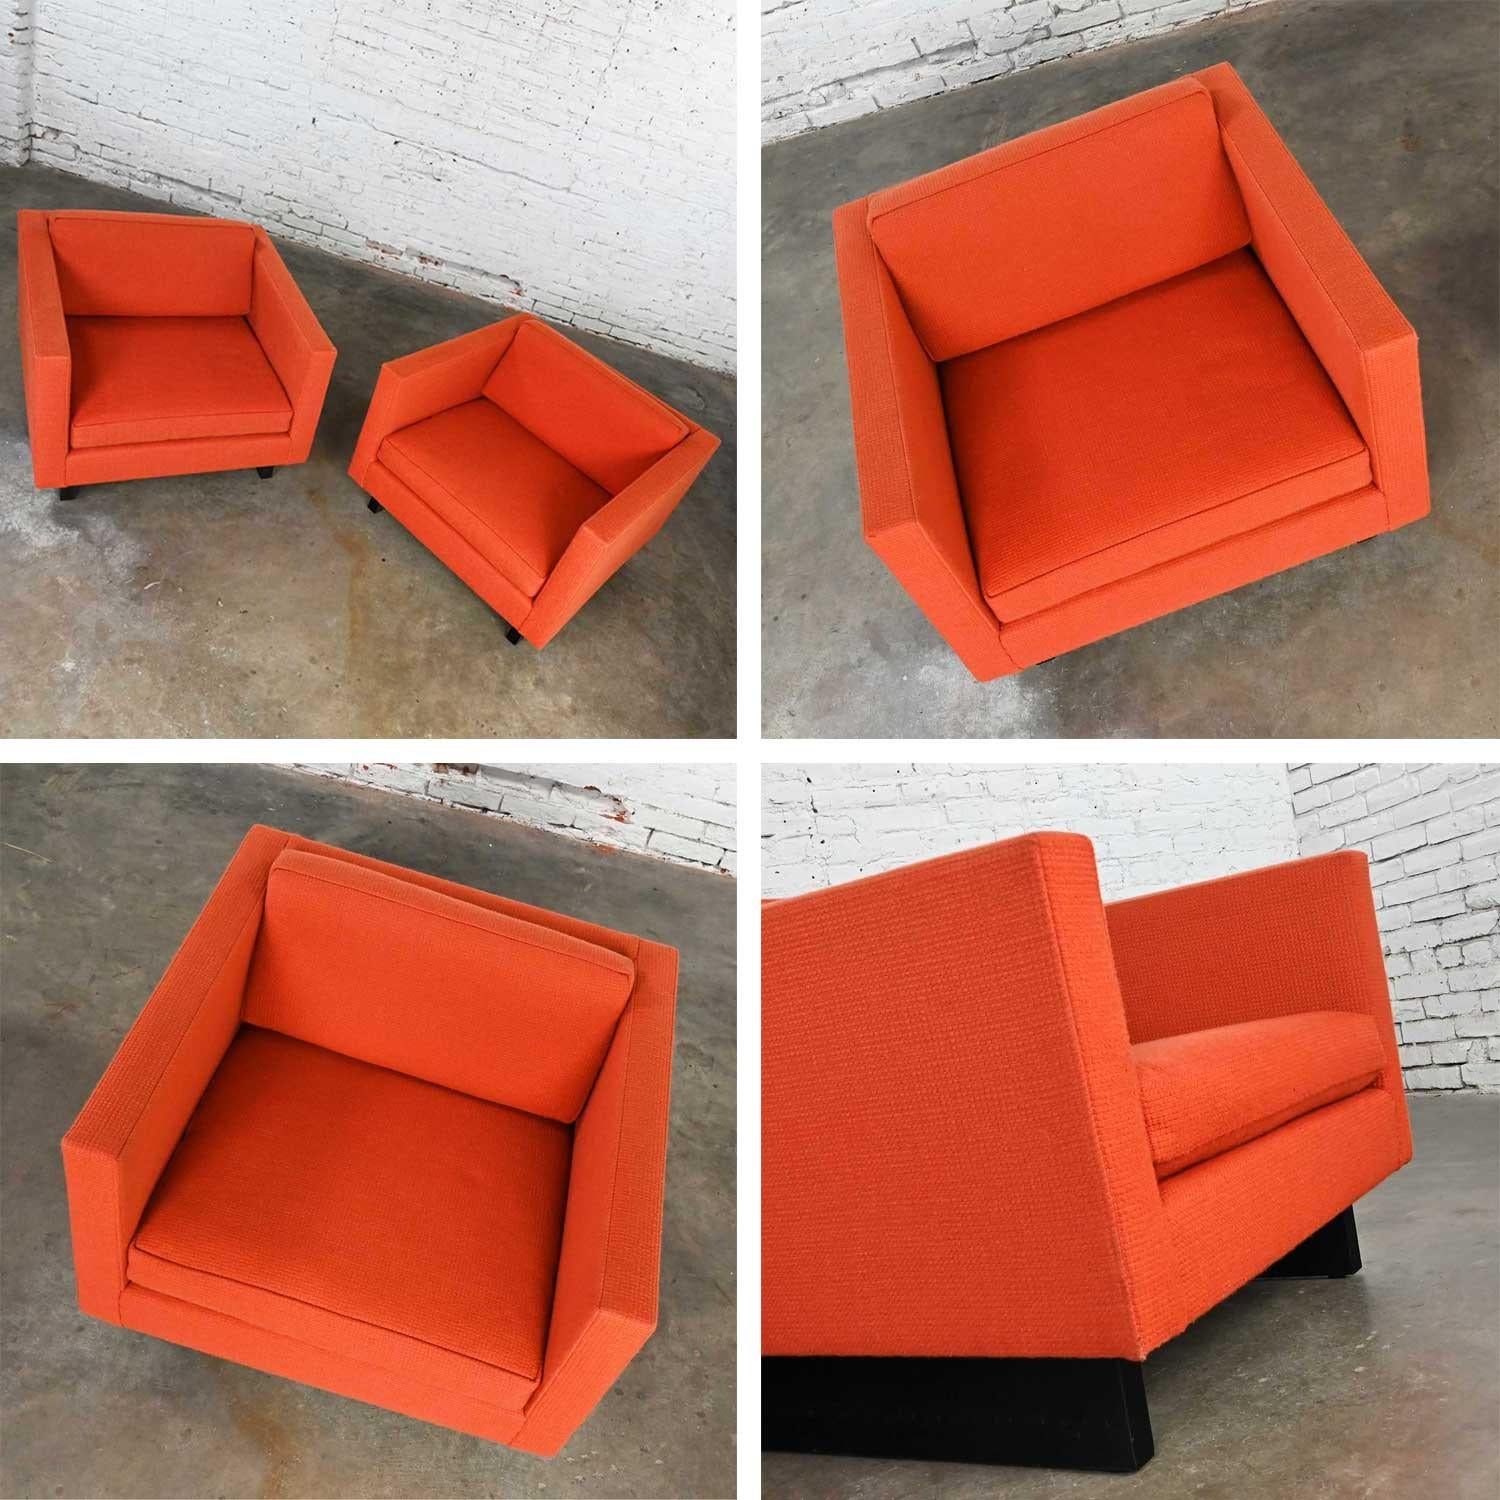 1970s Mcm to Modern Harvey Probber Club Chairs Orange 1571 Tuxedo Sleigh Bases For Sale 9